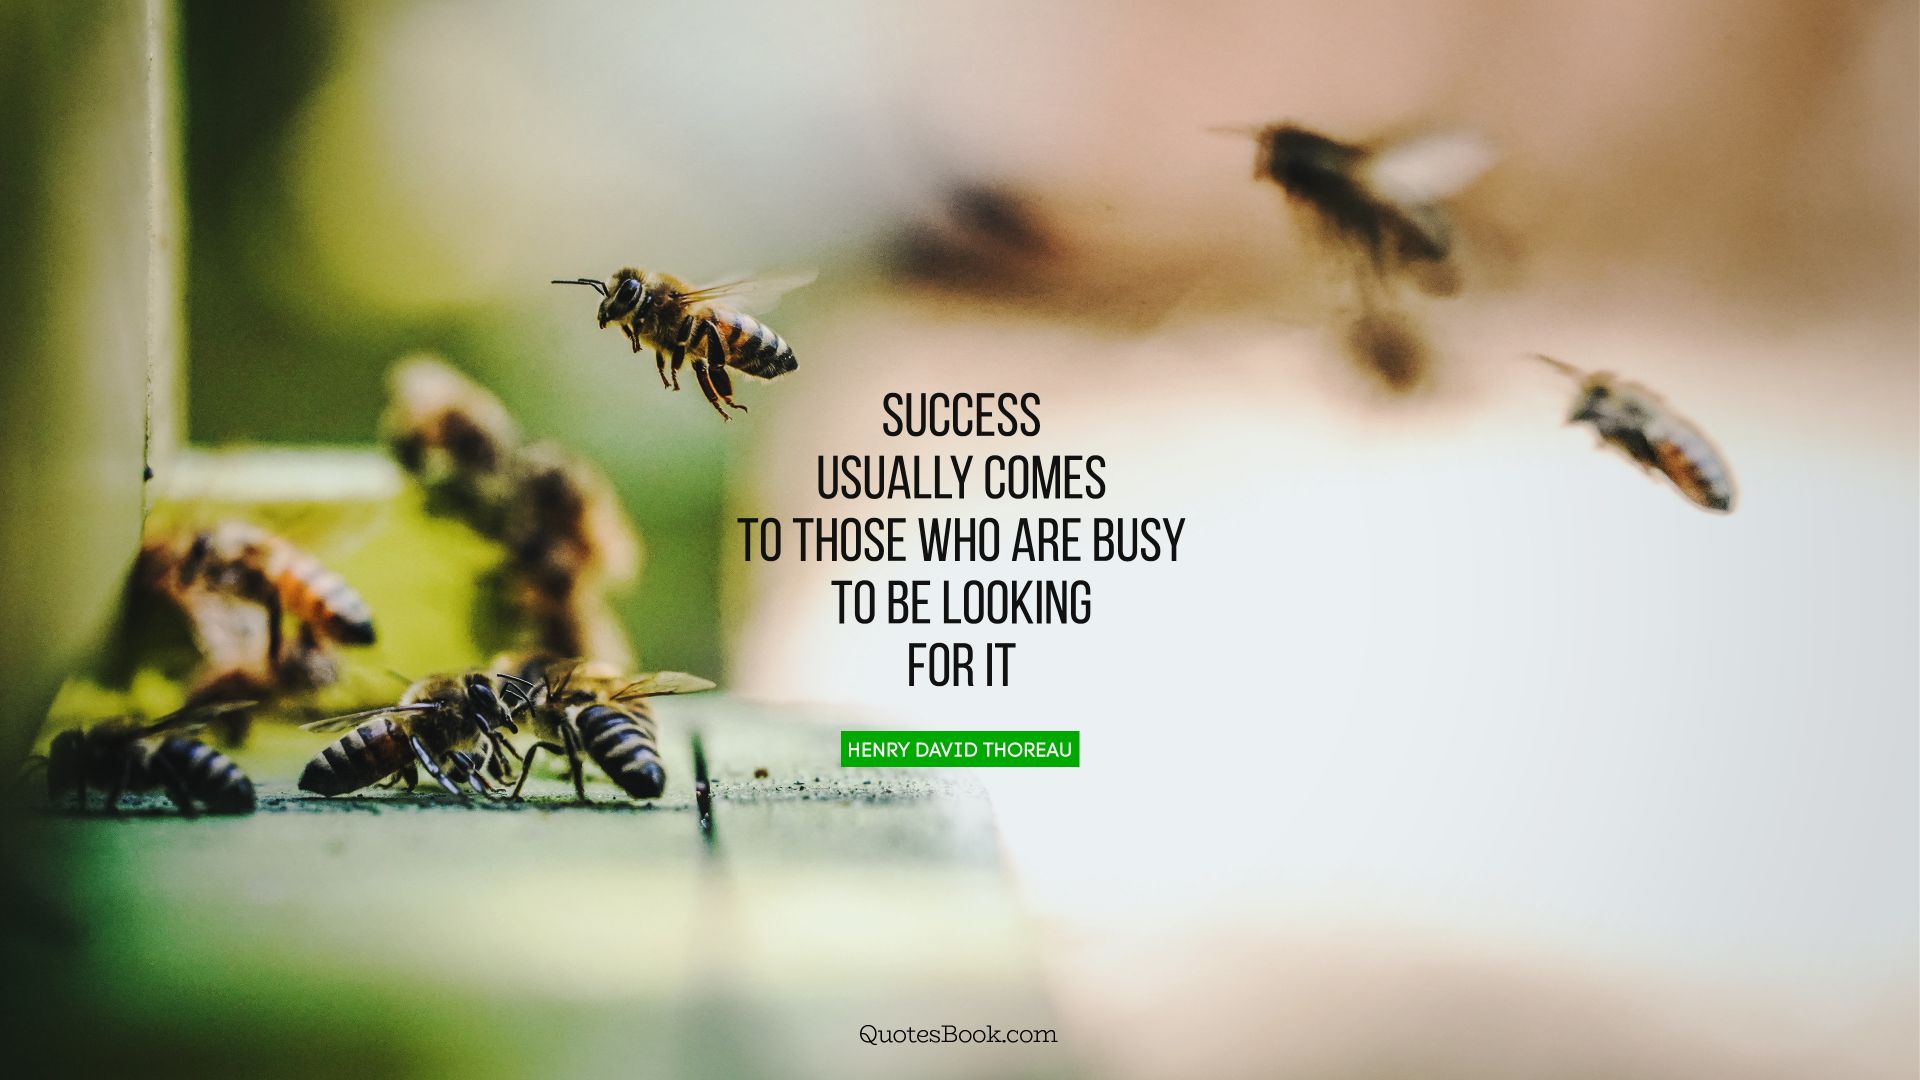 Success usually comes to those who are busy to be looking for it. - Quote by Henry David Thoreau